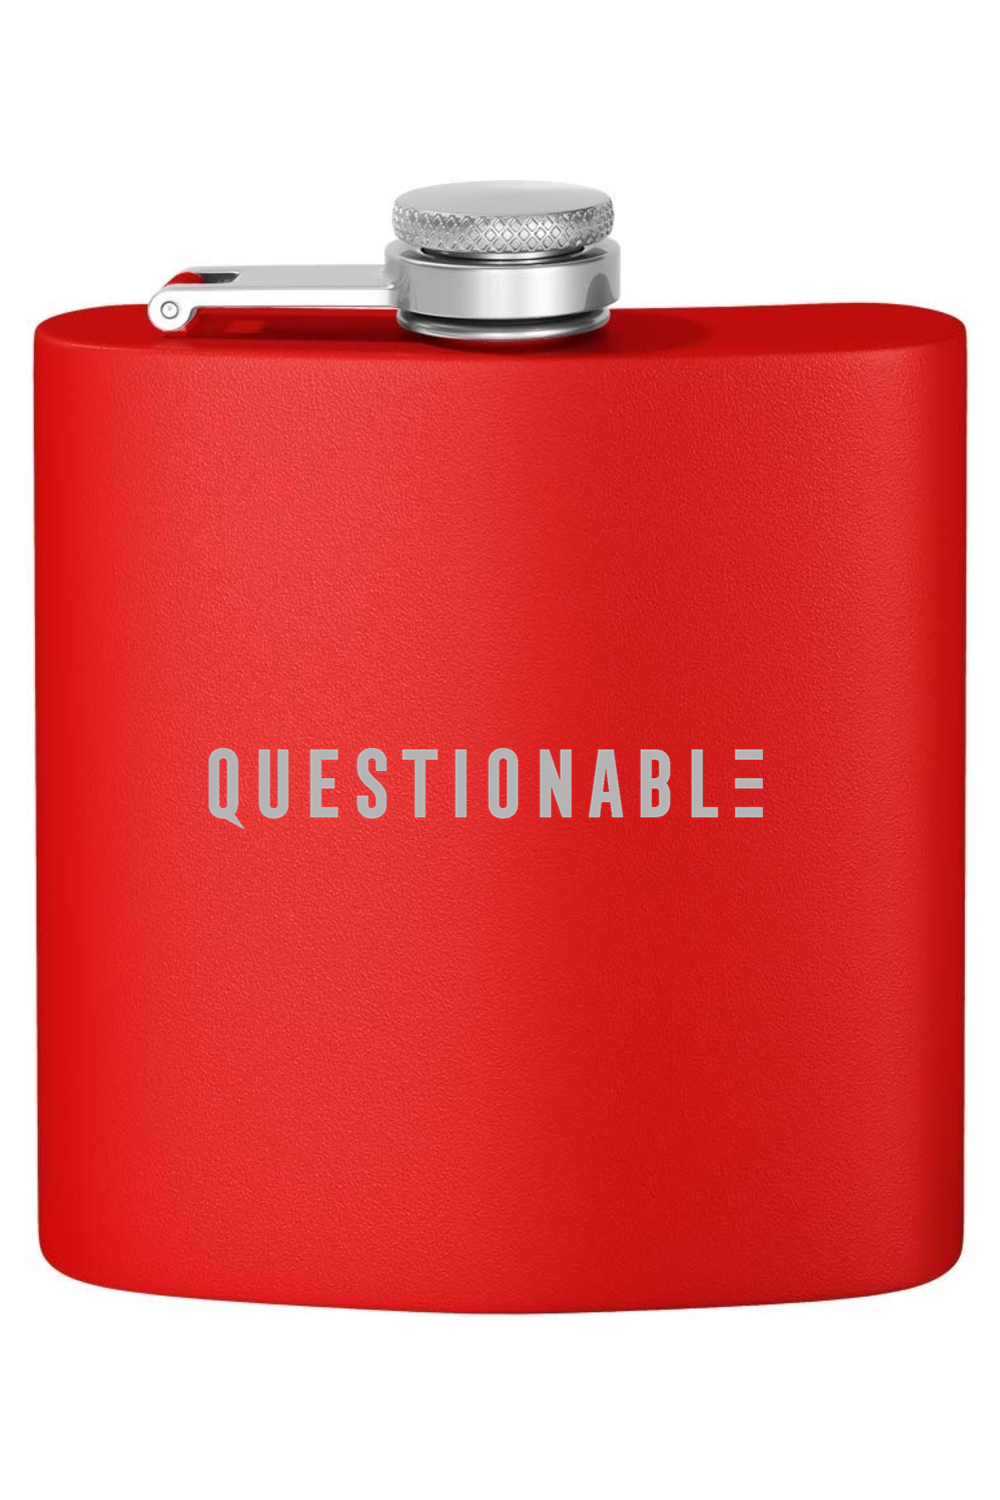 Questionable 6 oz. Stainless Steel Flask